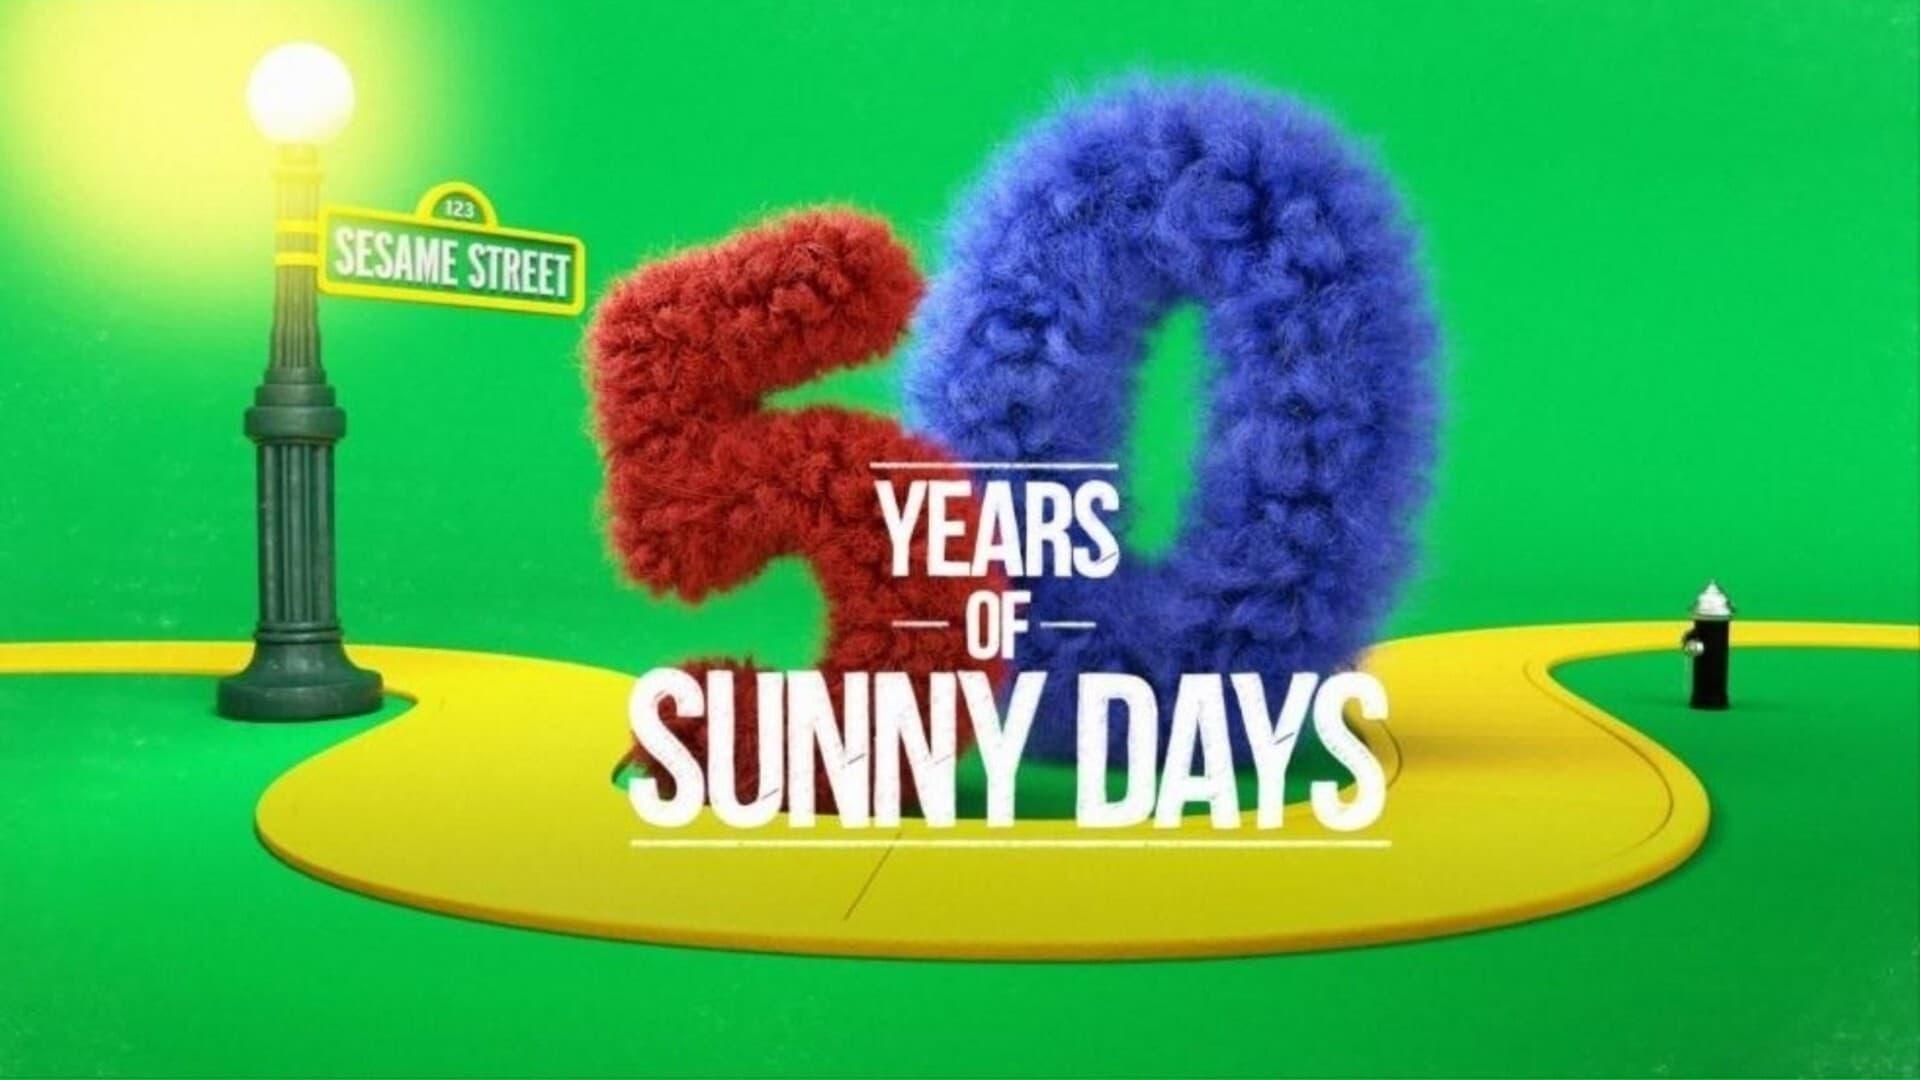 Sesame Street: 50 Years Of Sunny Days backdrop